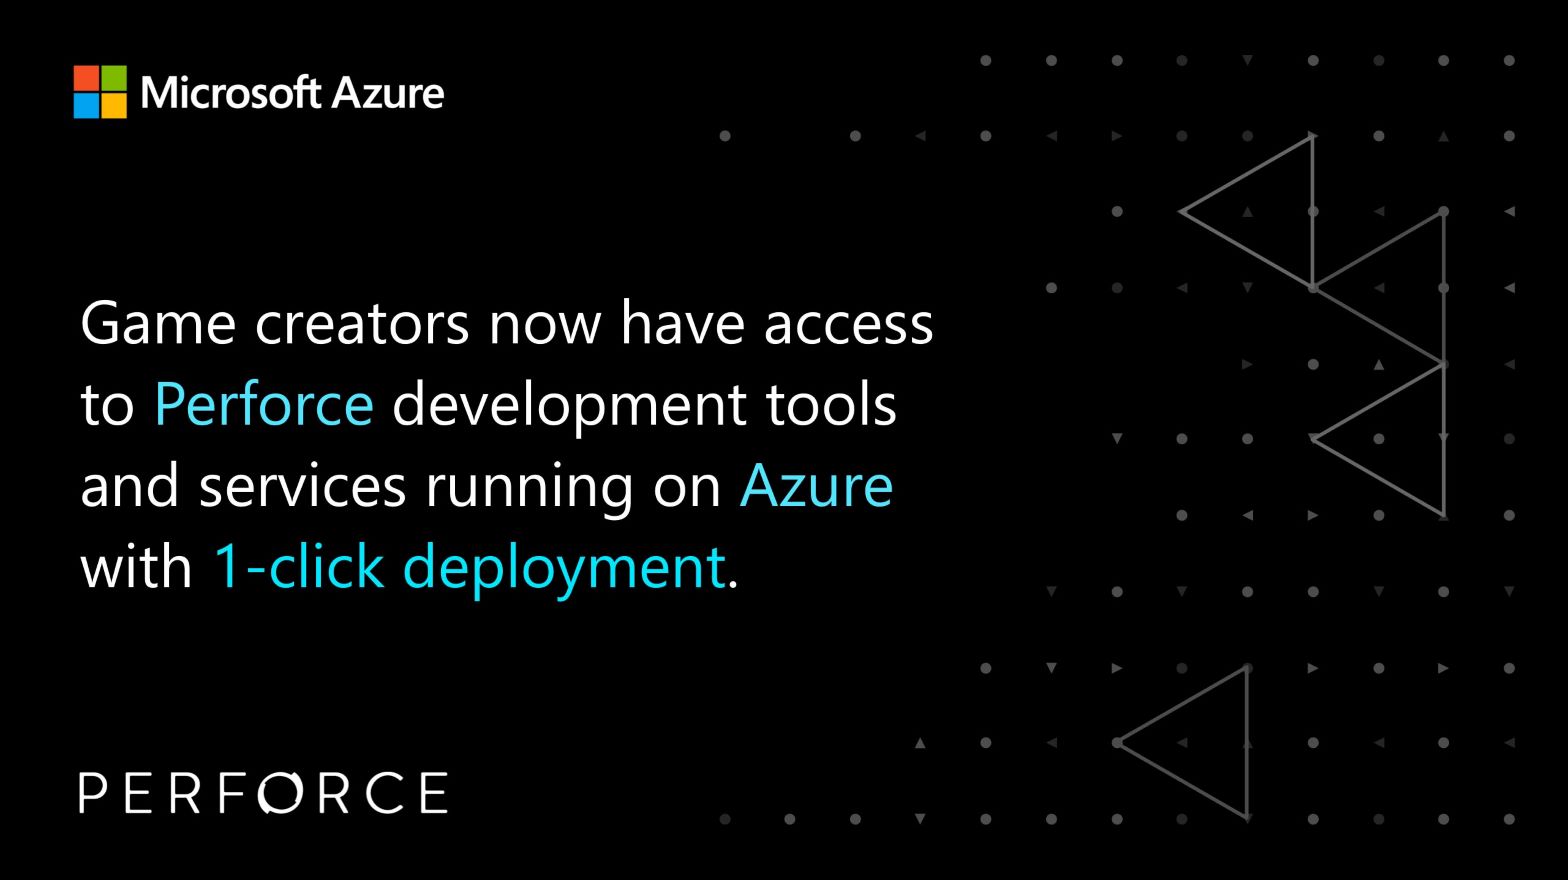 Perforce development tools and services available on Azure